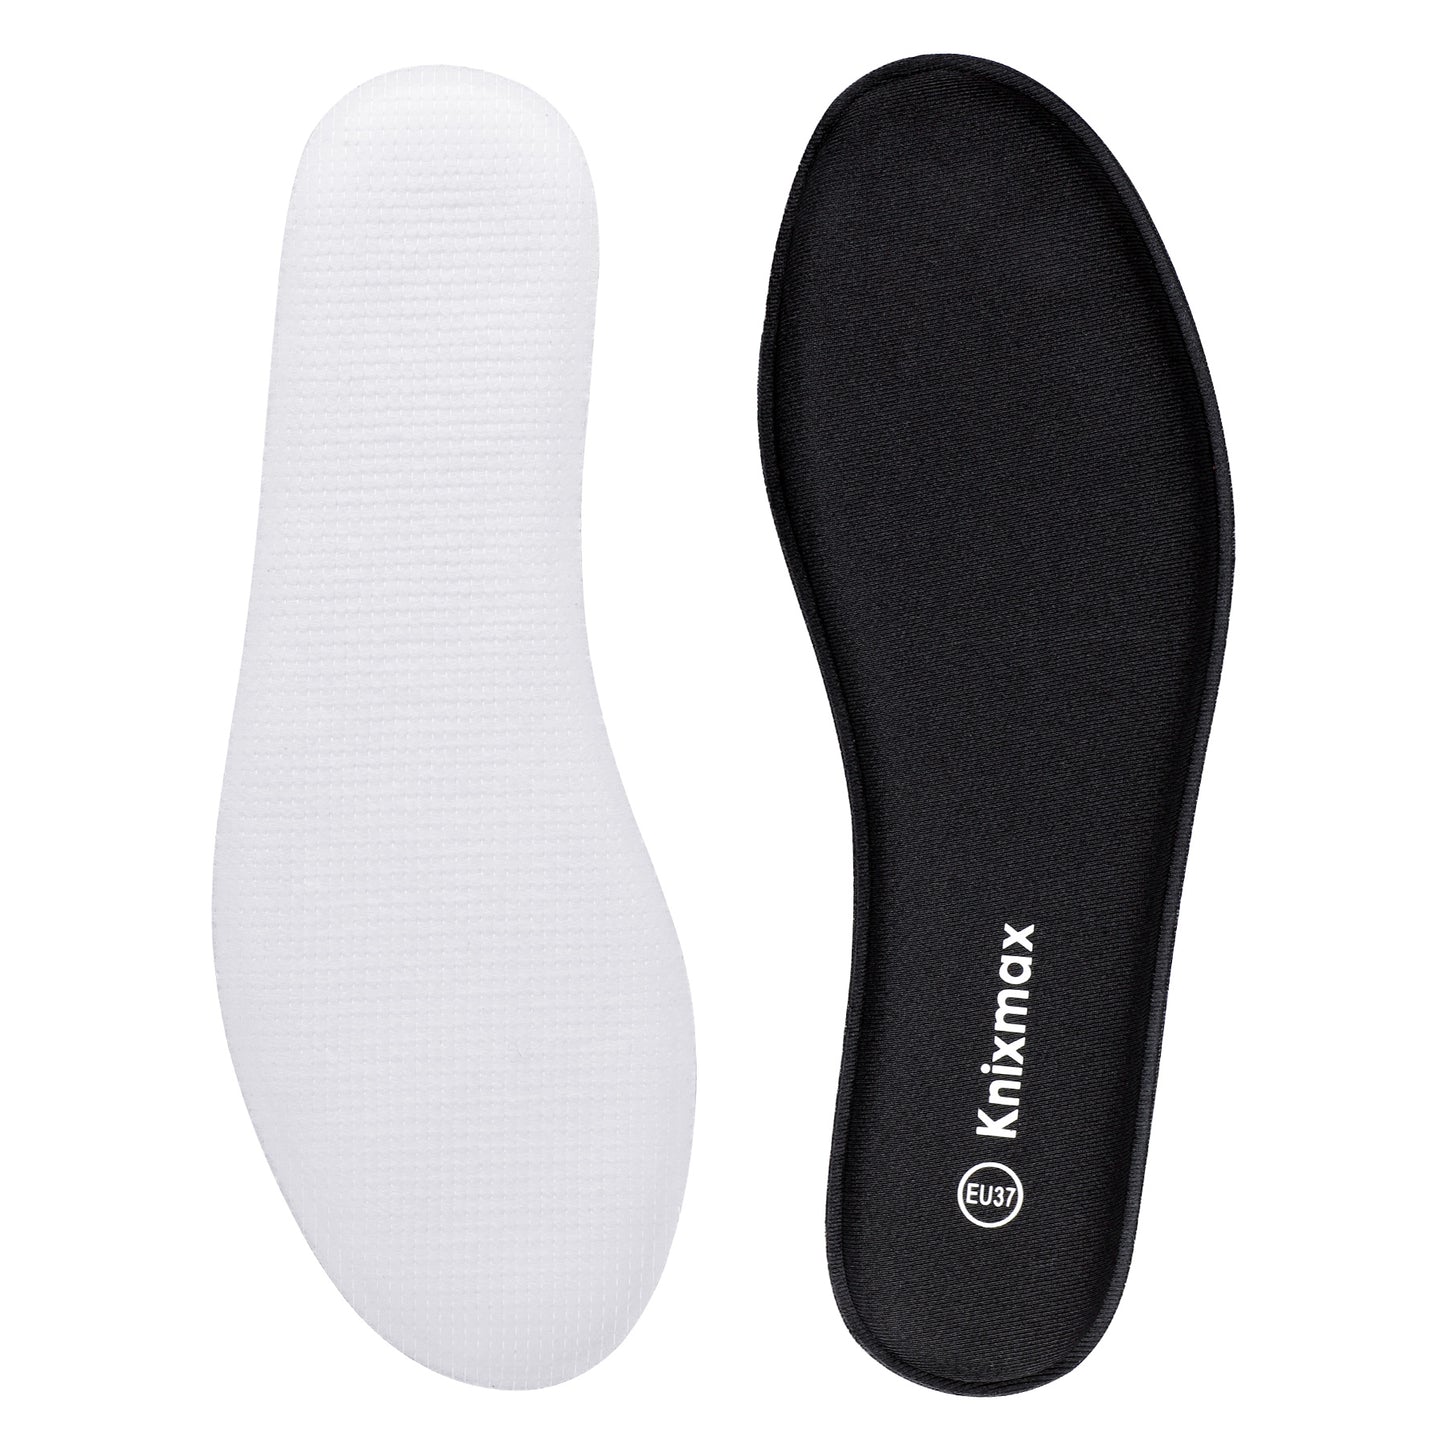 Knixmax Men's Memory Foam Insoles, Black, for Athletic Shoes & Sneakers